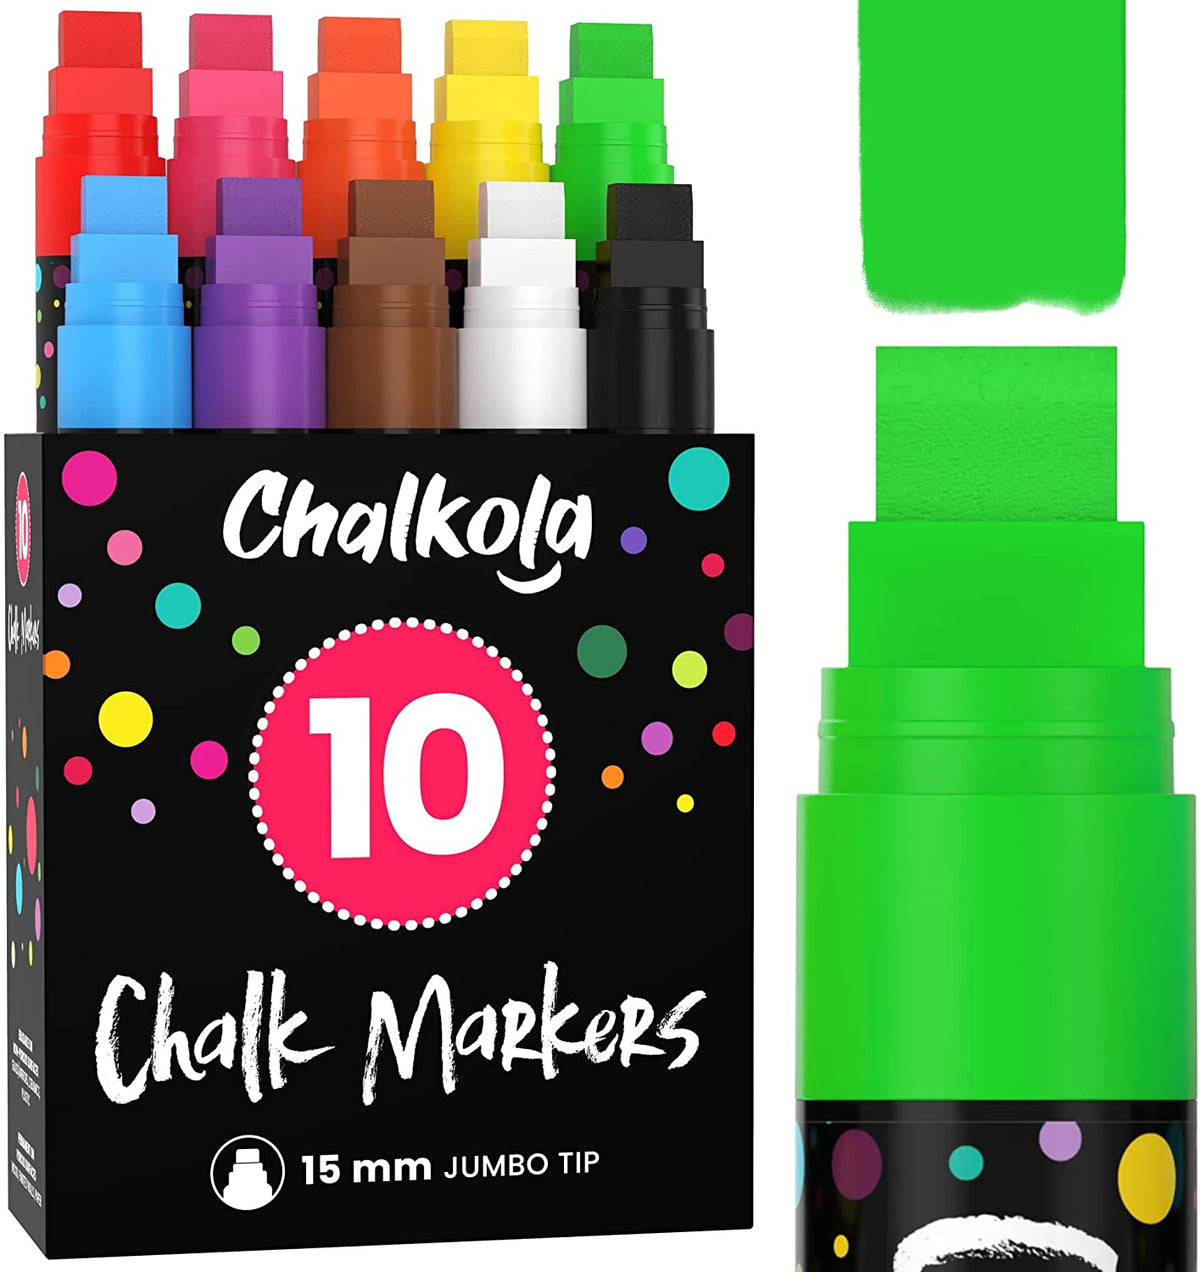  IJIANG Liquid Chalk Markers Neon Pens for Chalkboard Wet Erase  Markers with 6mm Reversible Tip for Blackboard, Whiteboard, Windows, Glass,  Mirror, Signs, Bistro (10 Classic Colors) : Office Products